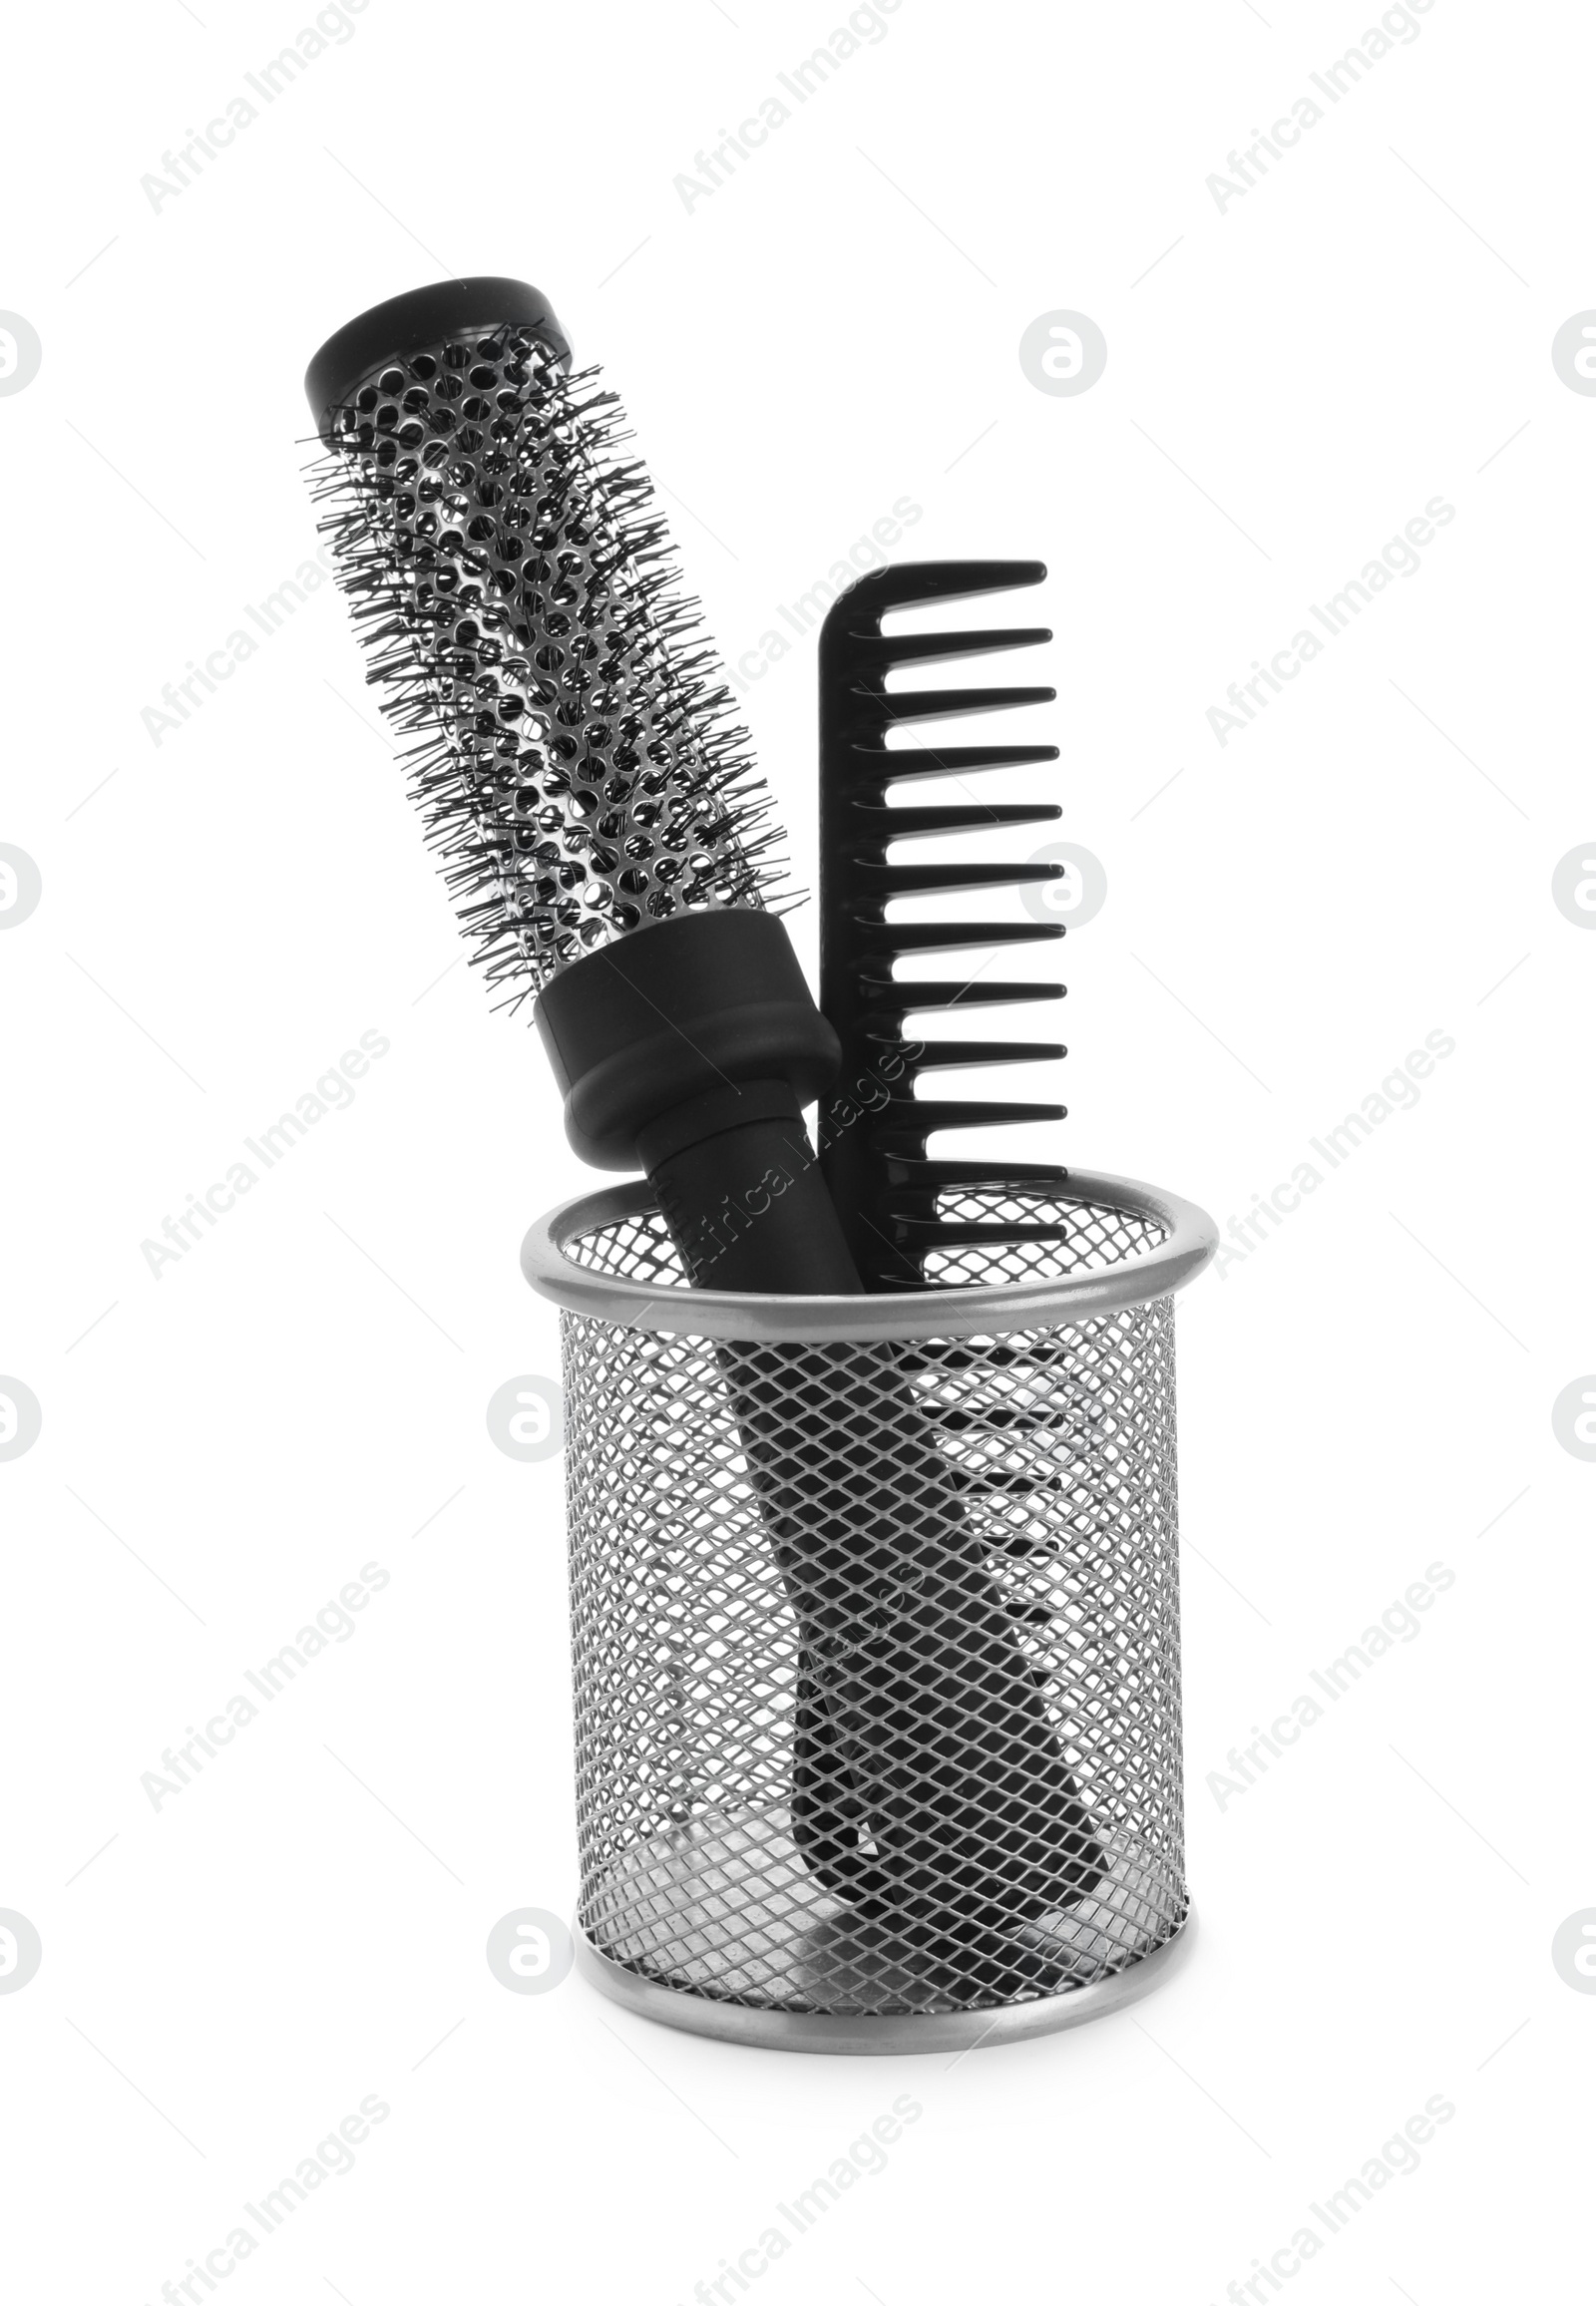 Photo of New modern hair brush and comb in metal holder isolated on white